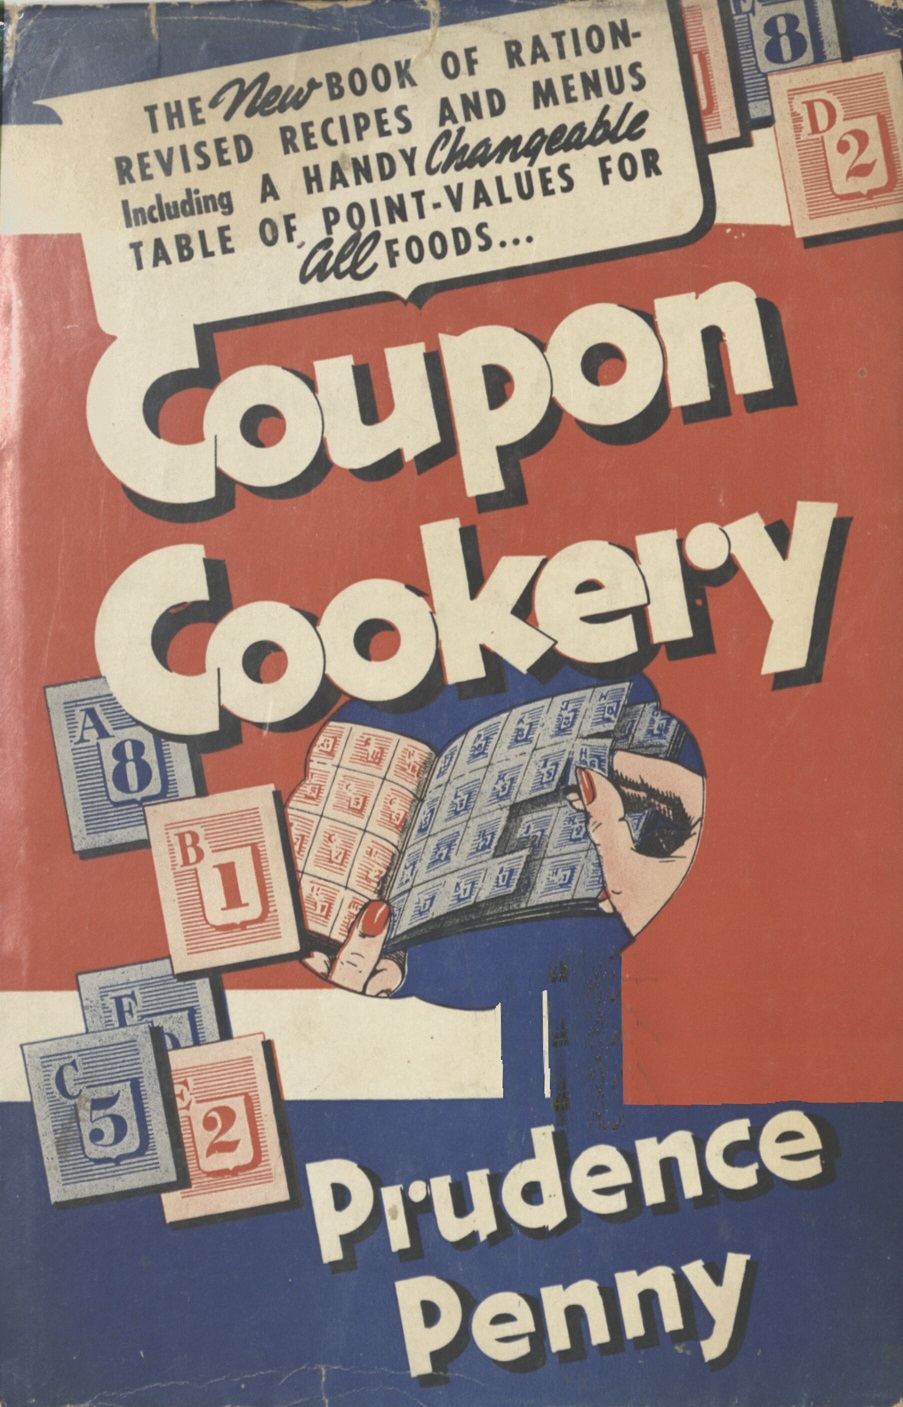 Title page to Coupon Cookery